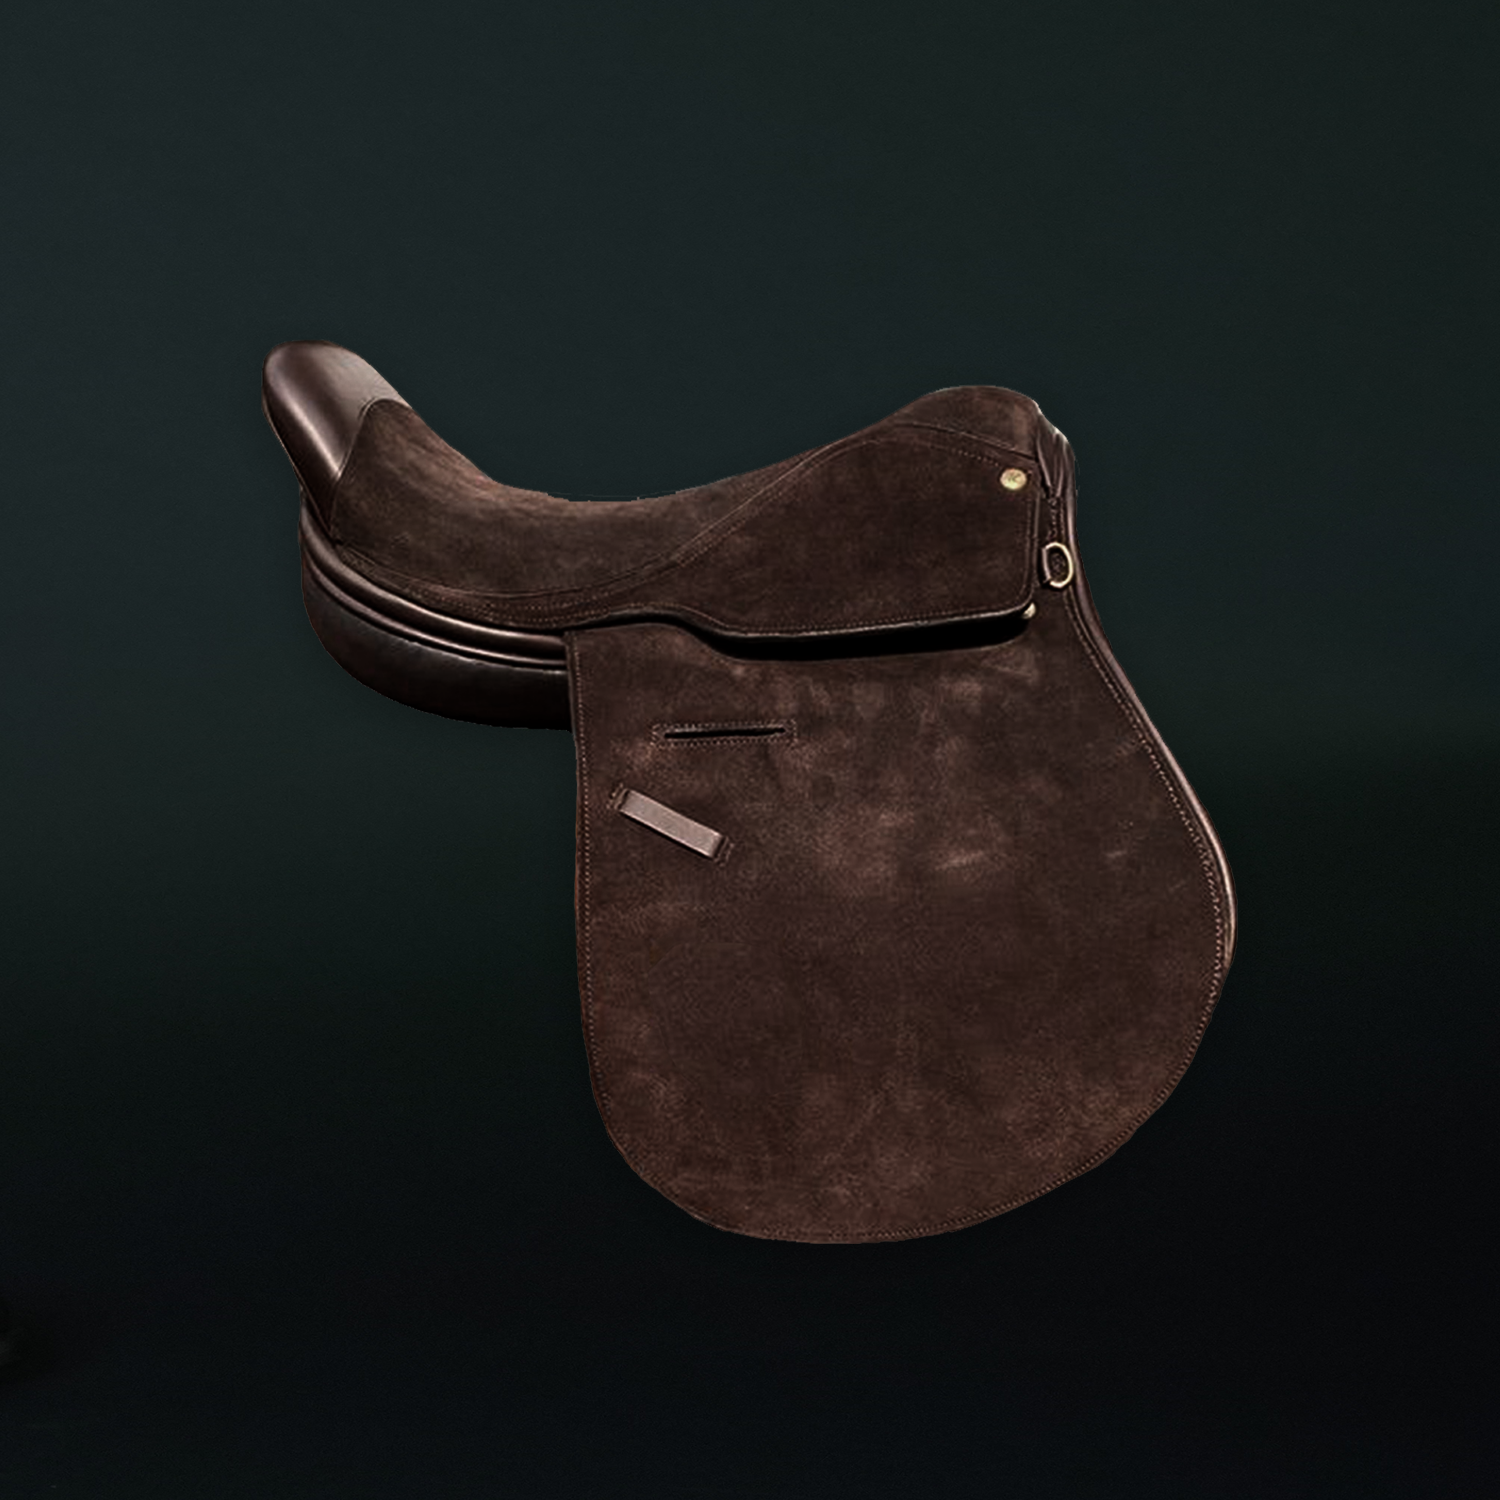 S&K Juniors Polo Suede Saddle